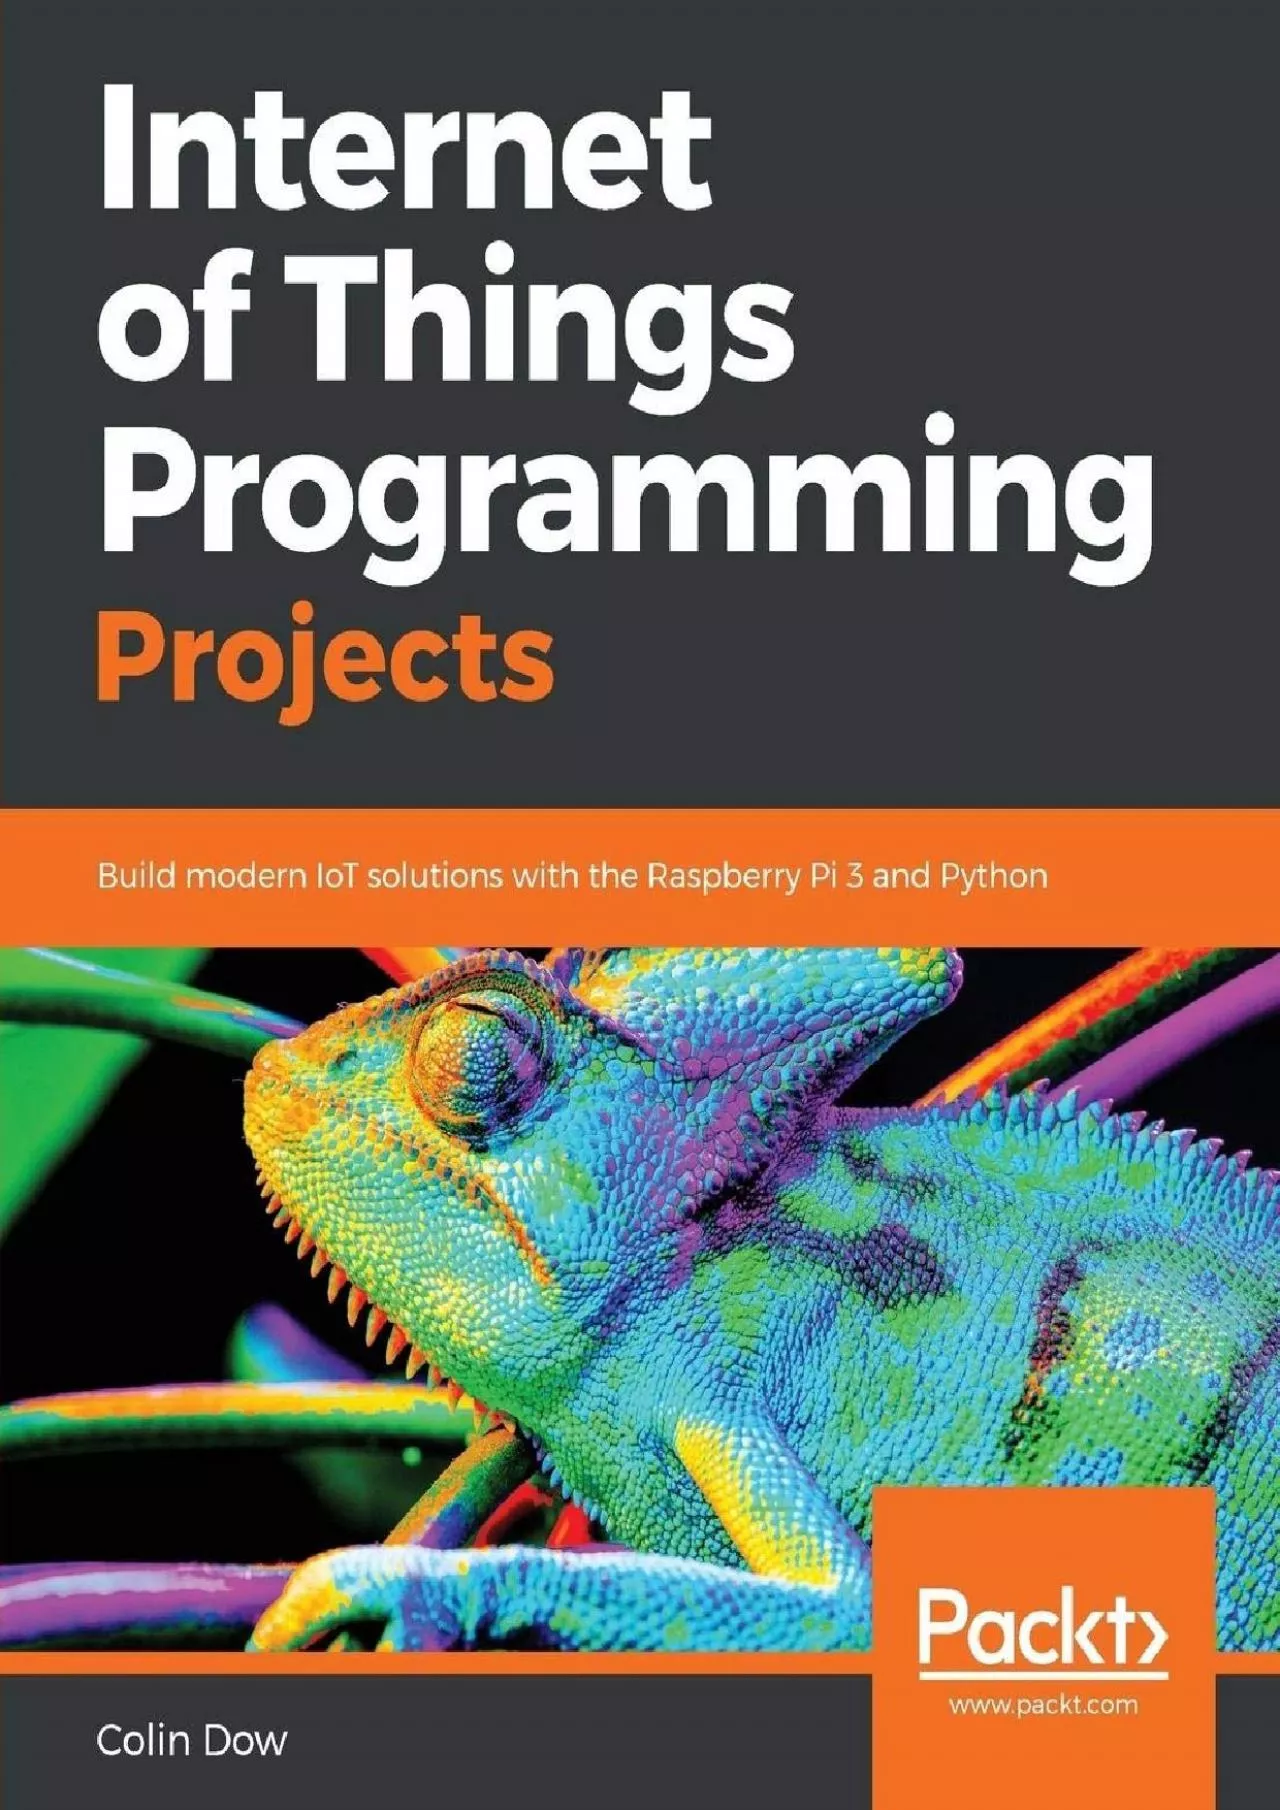 [BEST]-Internet of Things Programming Projects: Build modern IoT solutions with the Raspberry